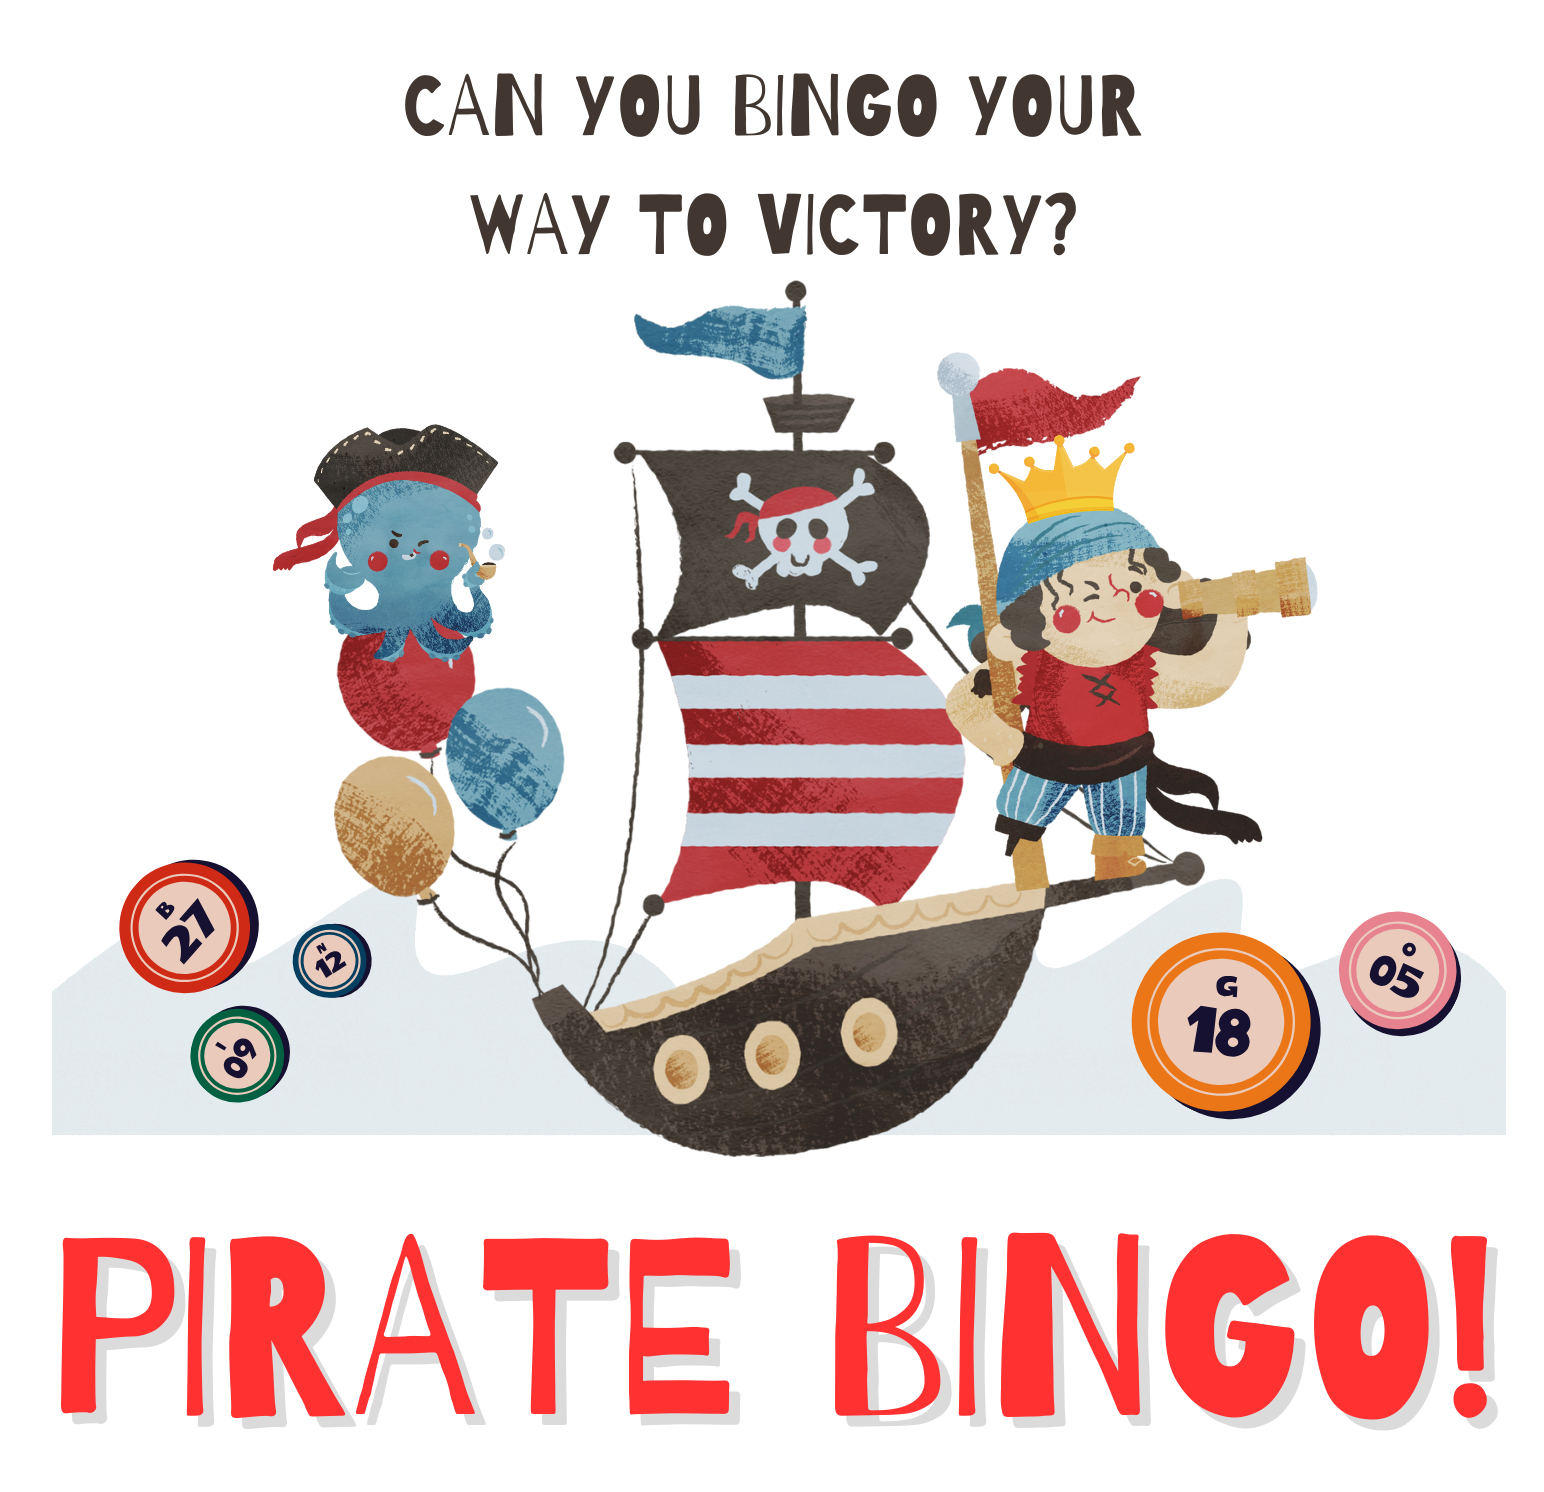 Clipart of pirates with red text that says ,"Pirate Bingo!"